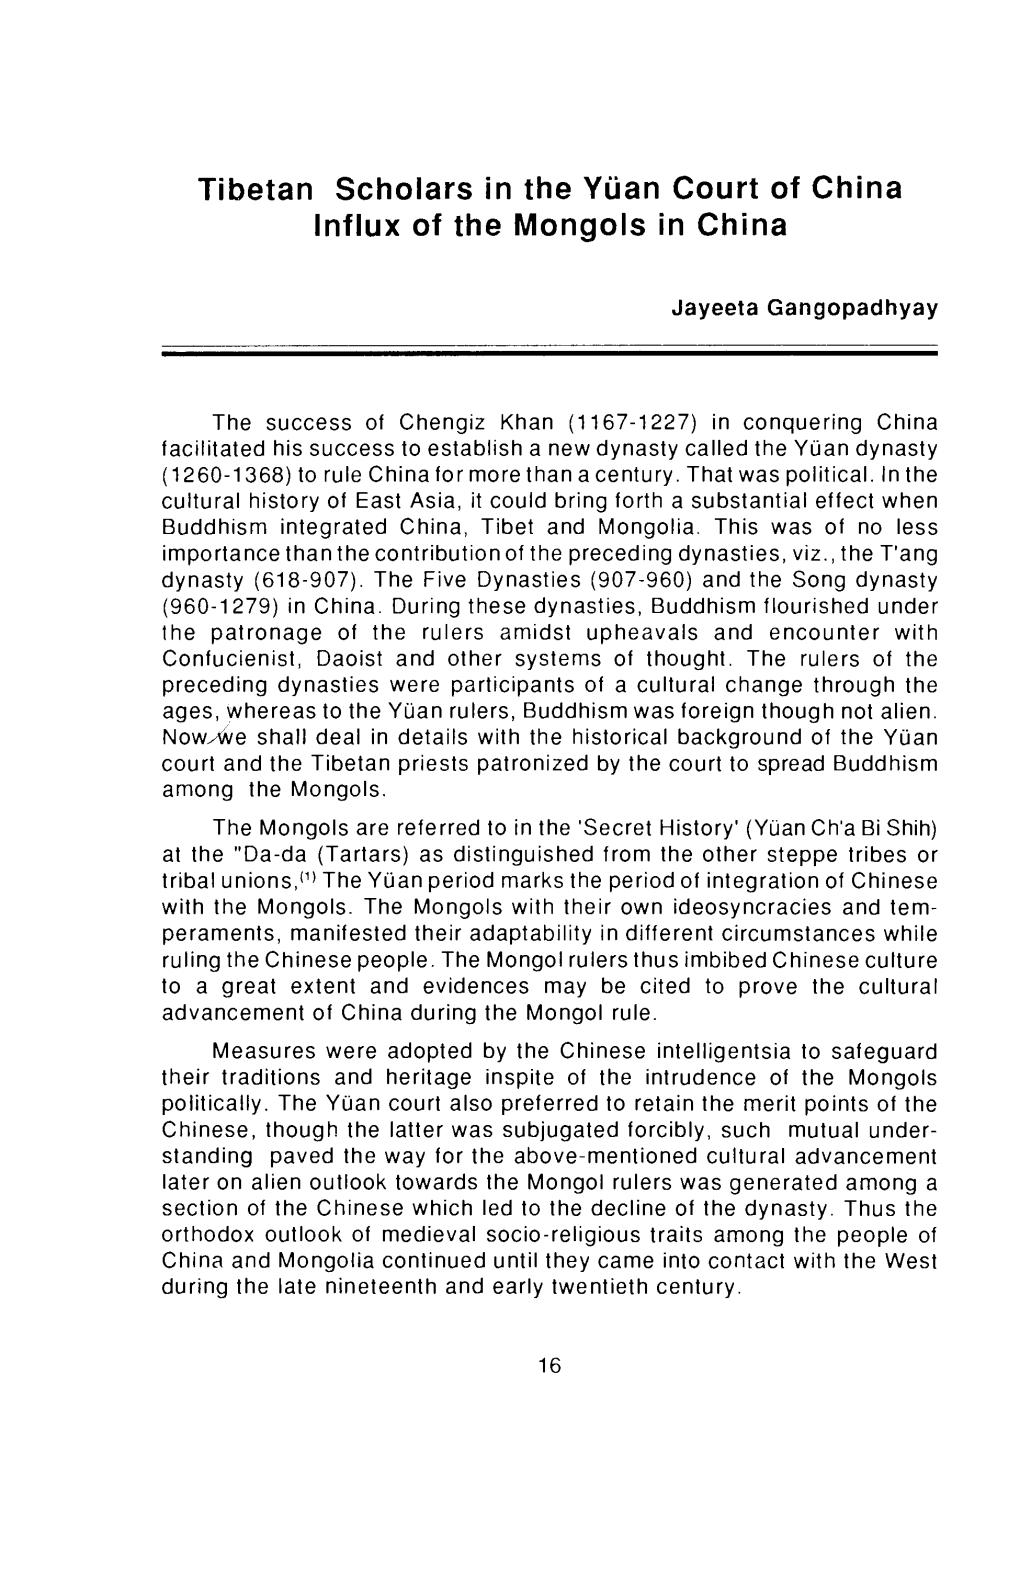 Tibetan Scholars in the Yuan Court of China: Influx of the Mongols in China